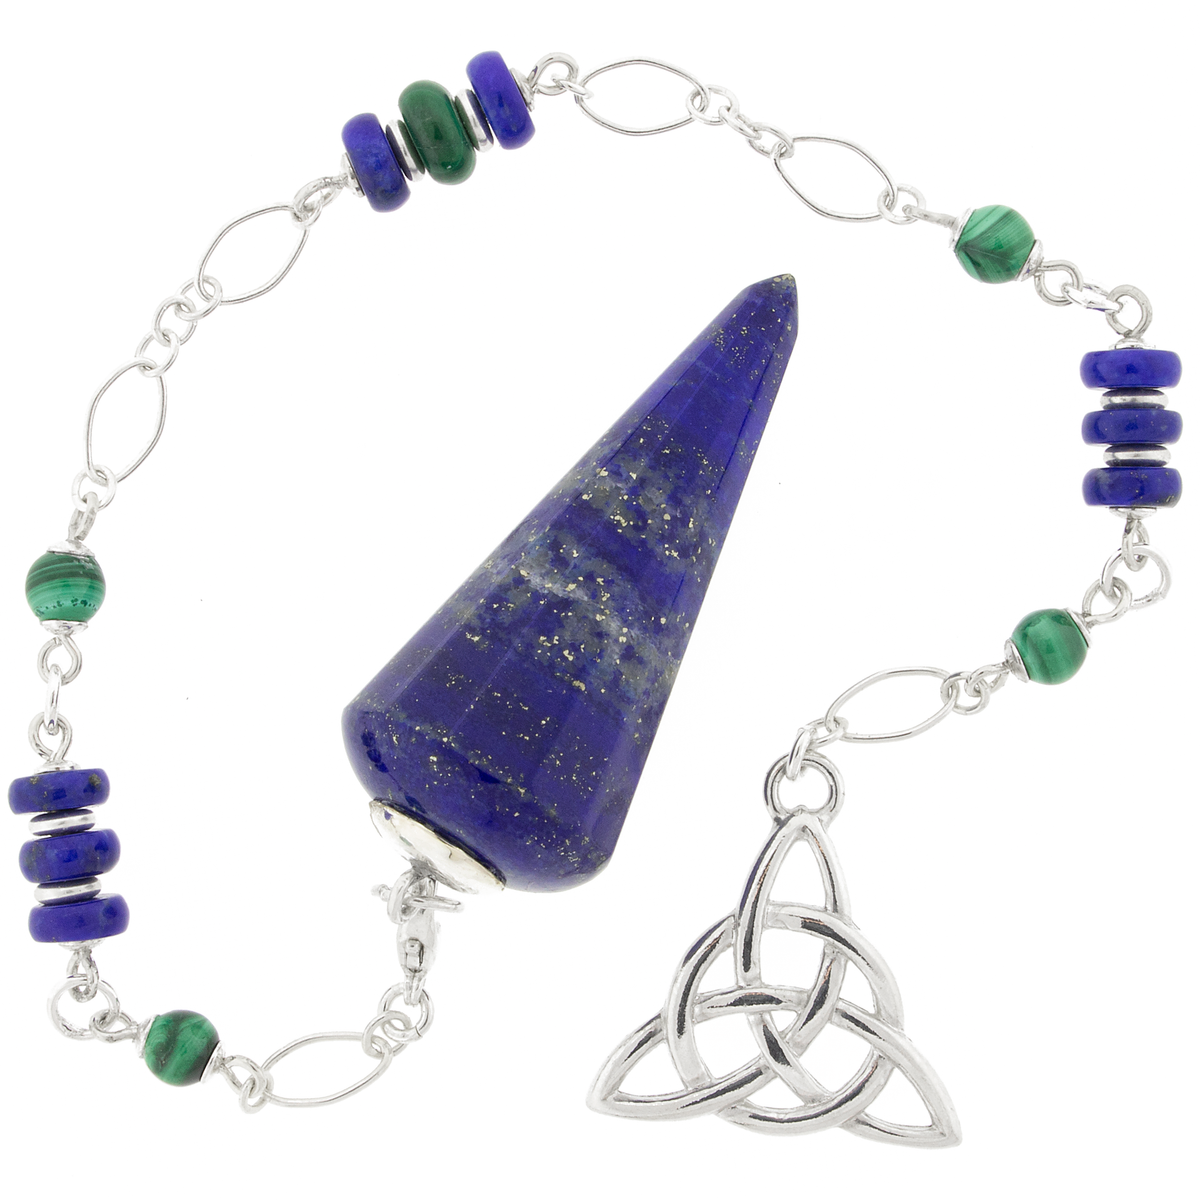 One of a Kind #367 - Lapis Lazuli, Malachite and Sterling Silver Pendulum by Ask Your Pendulum